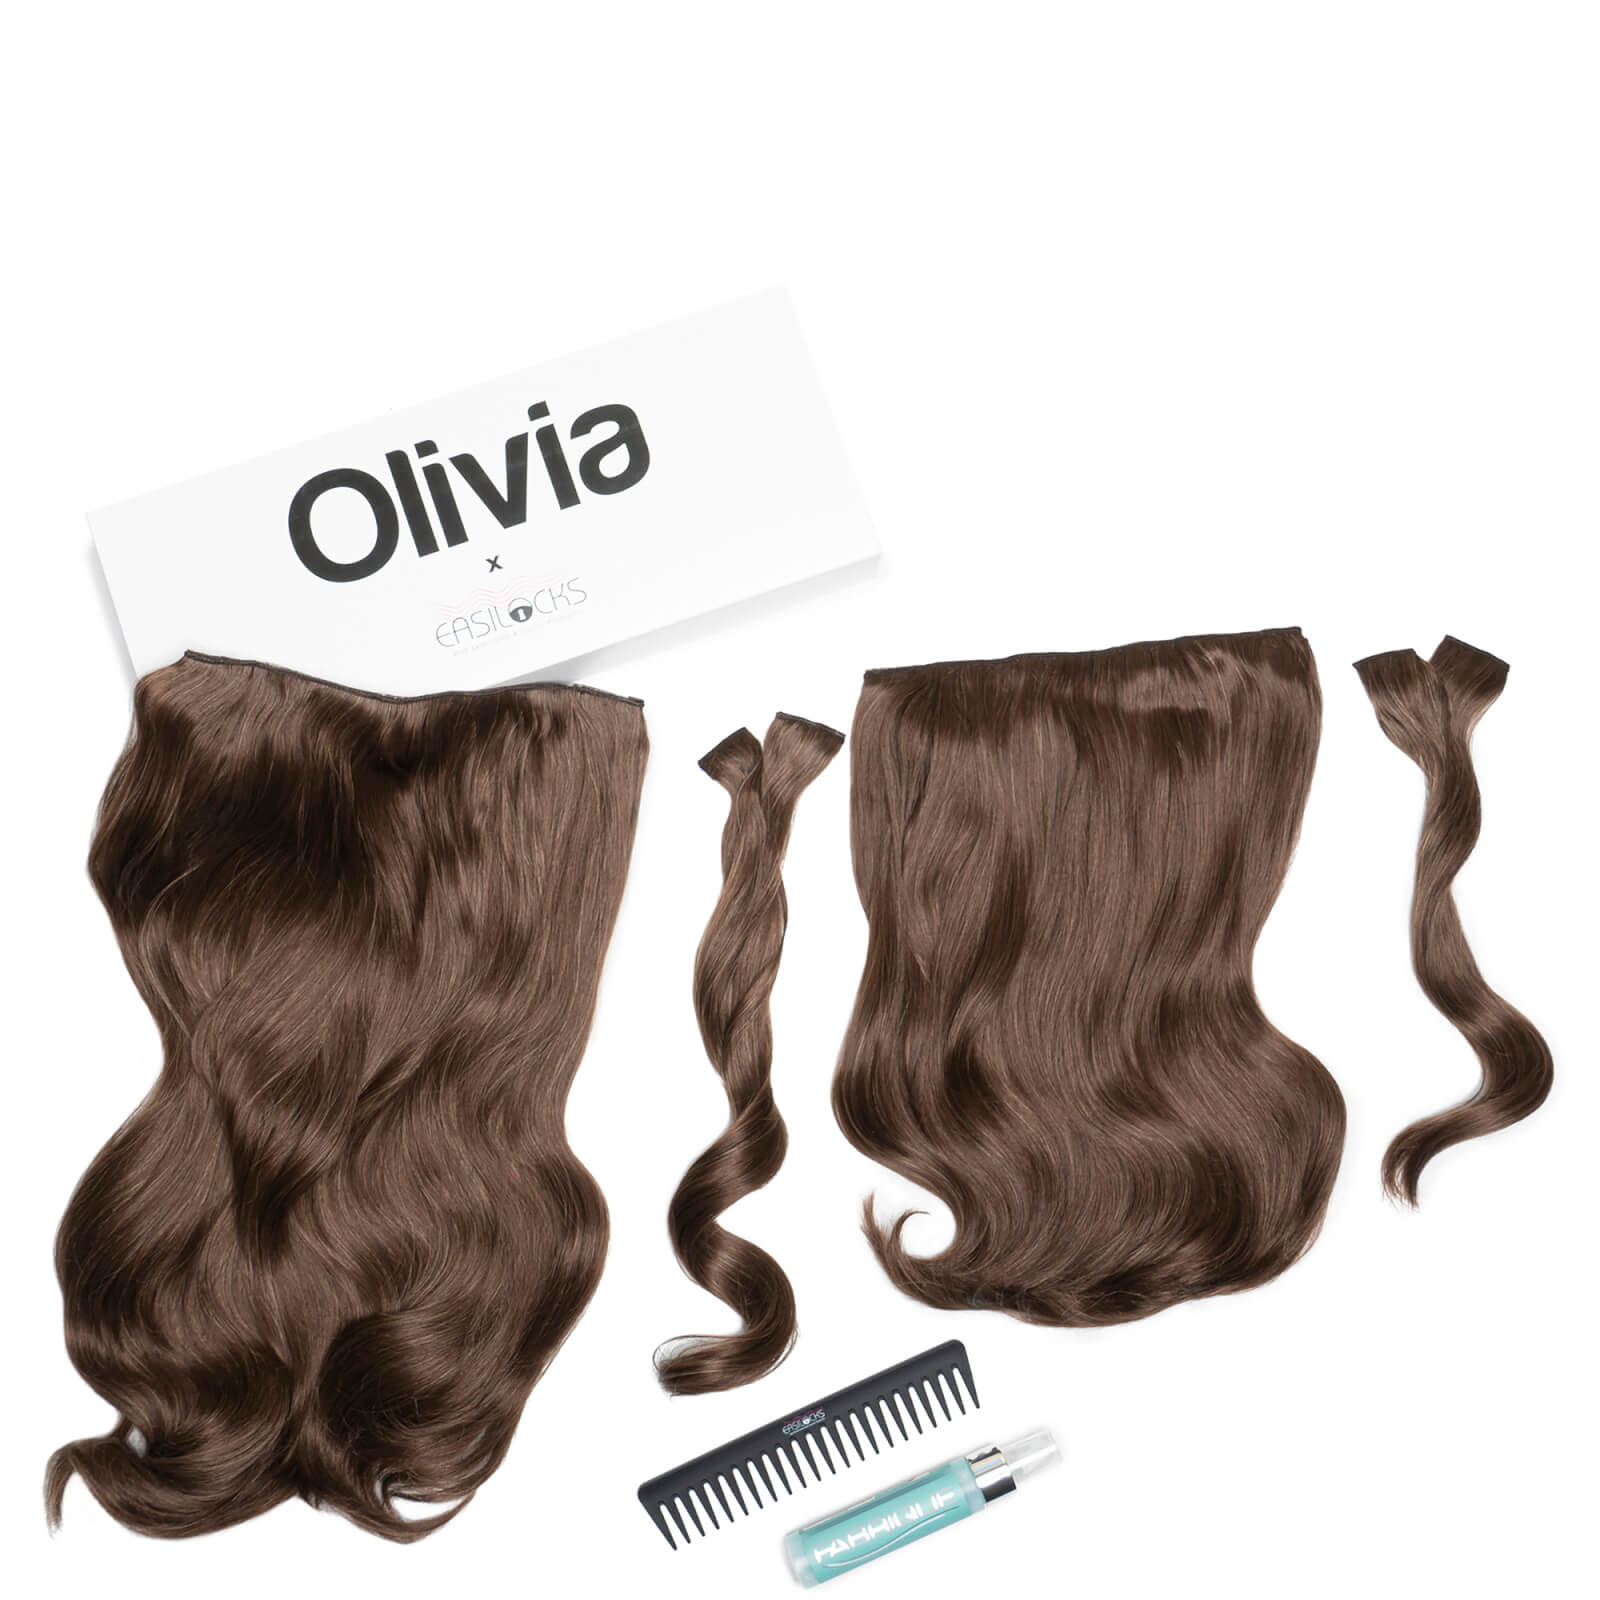 Olivia X Easilocks Wavy Collection (Various Options) - Brown Cocoa